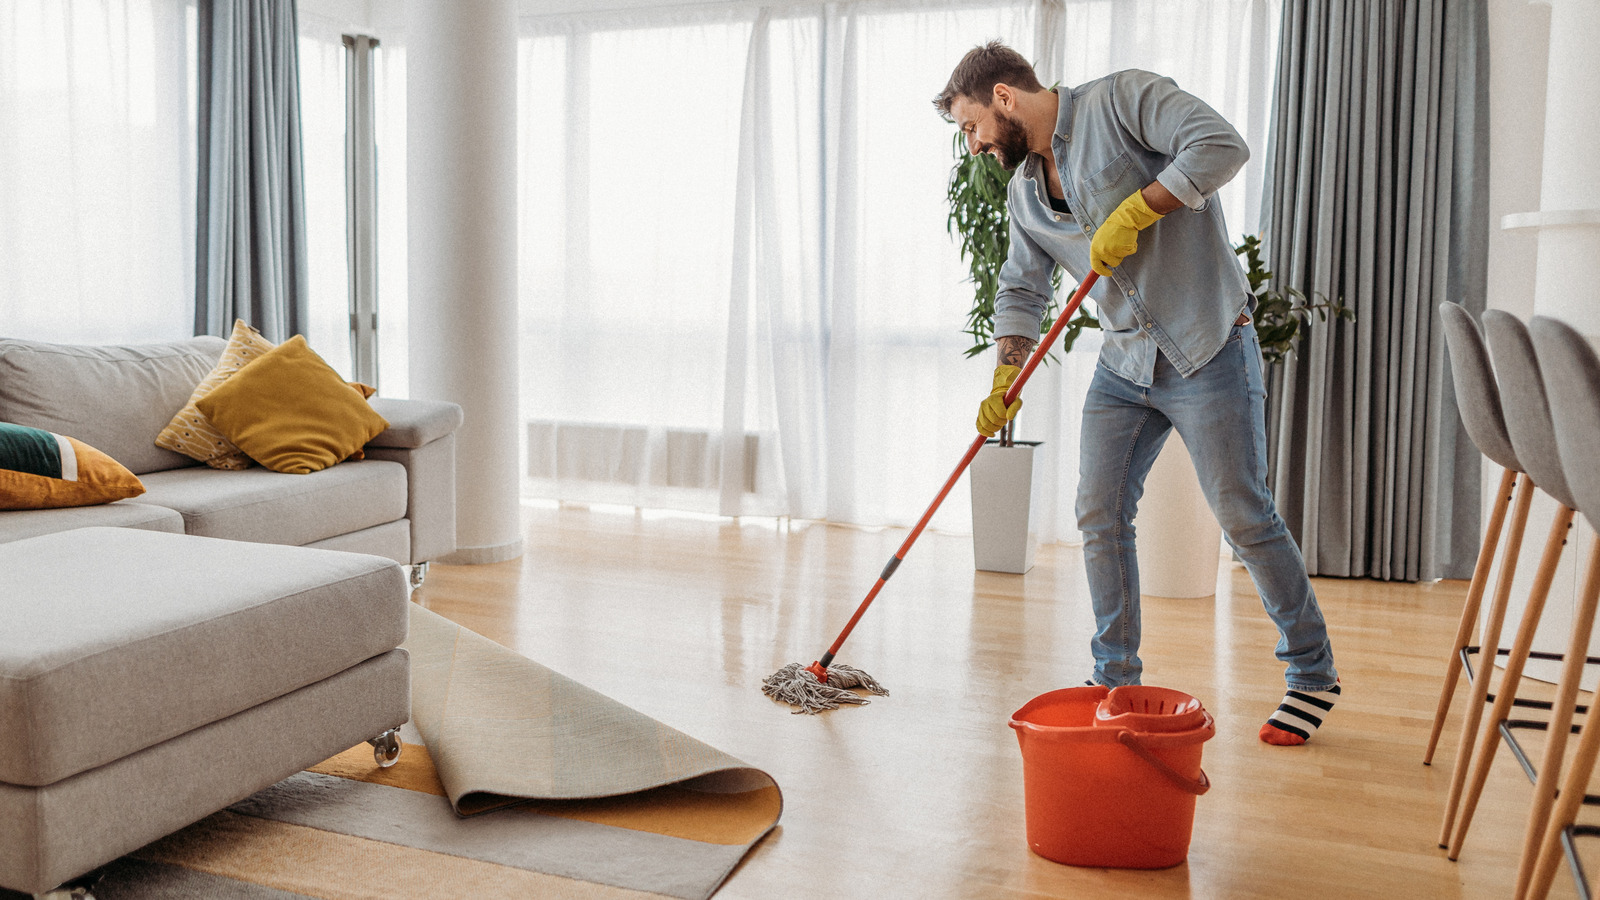 The Floors That You Cannot Clean With Dish Soap And Why